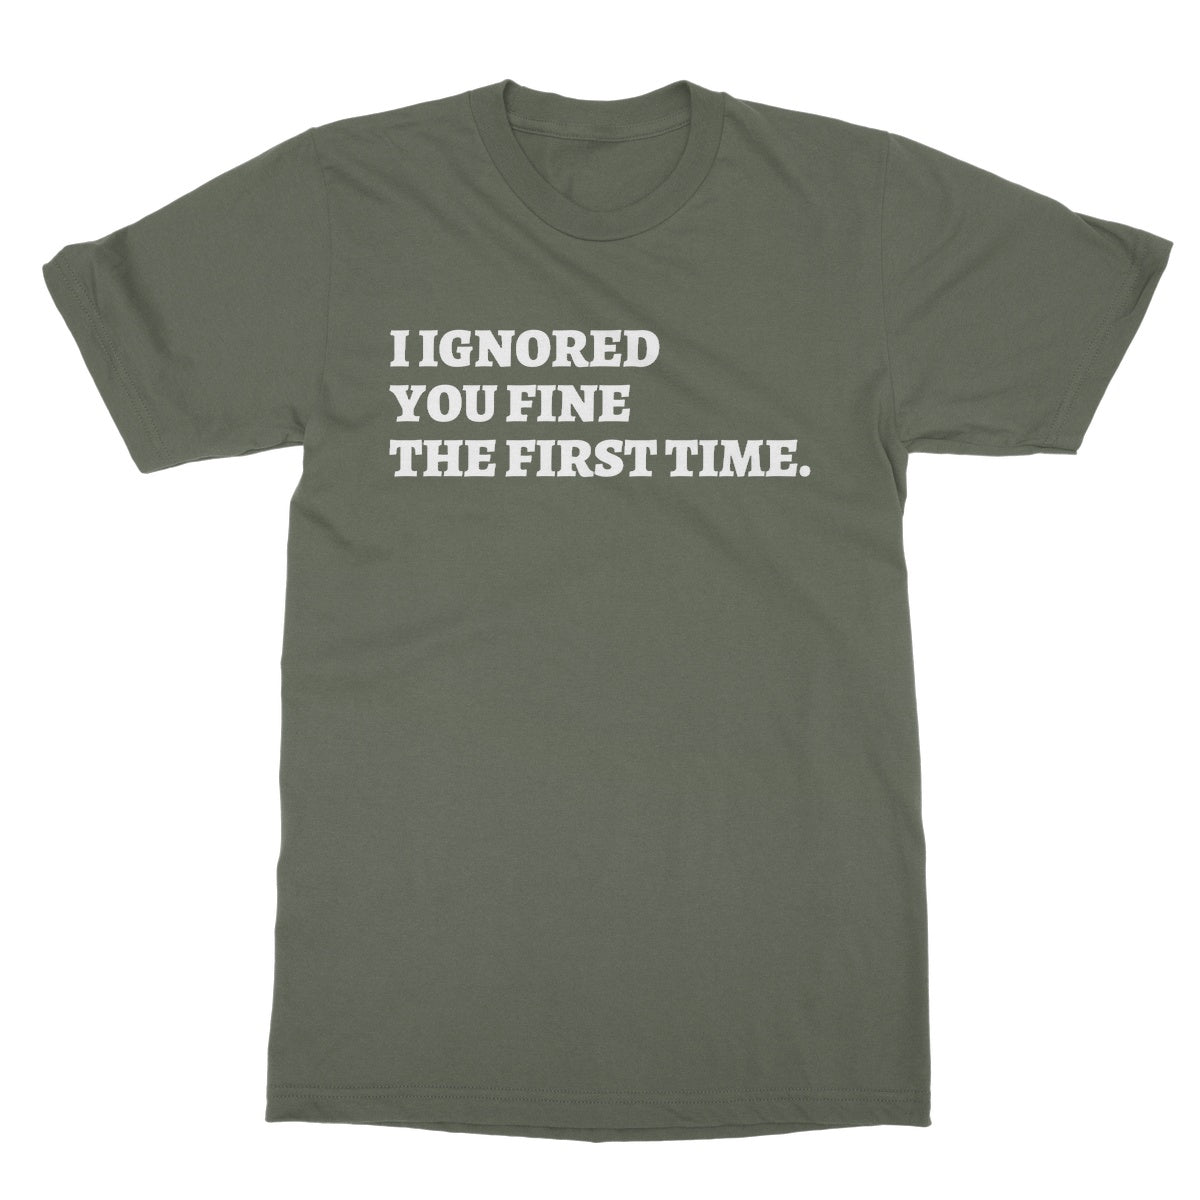 I ignored you fine the first time t shirt green